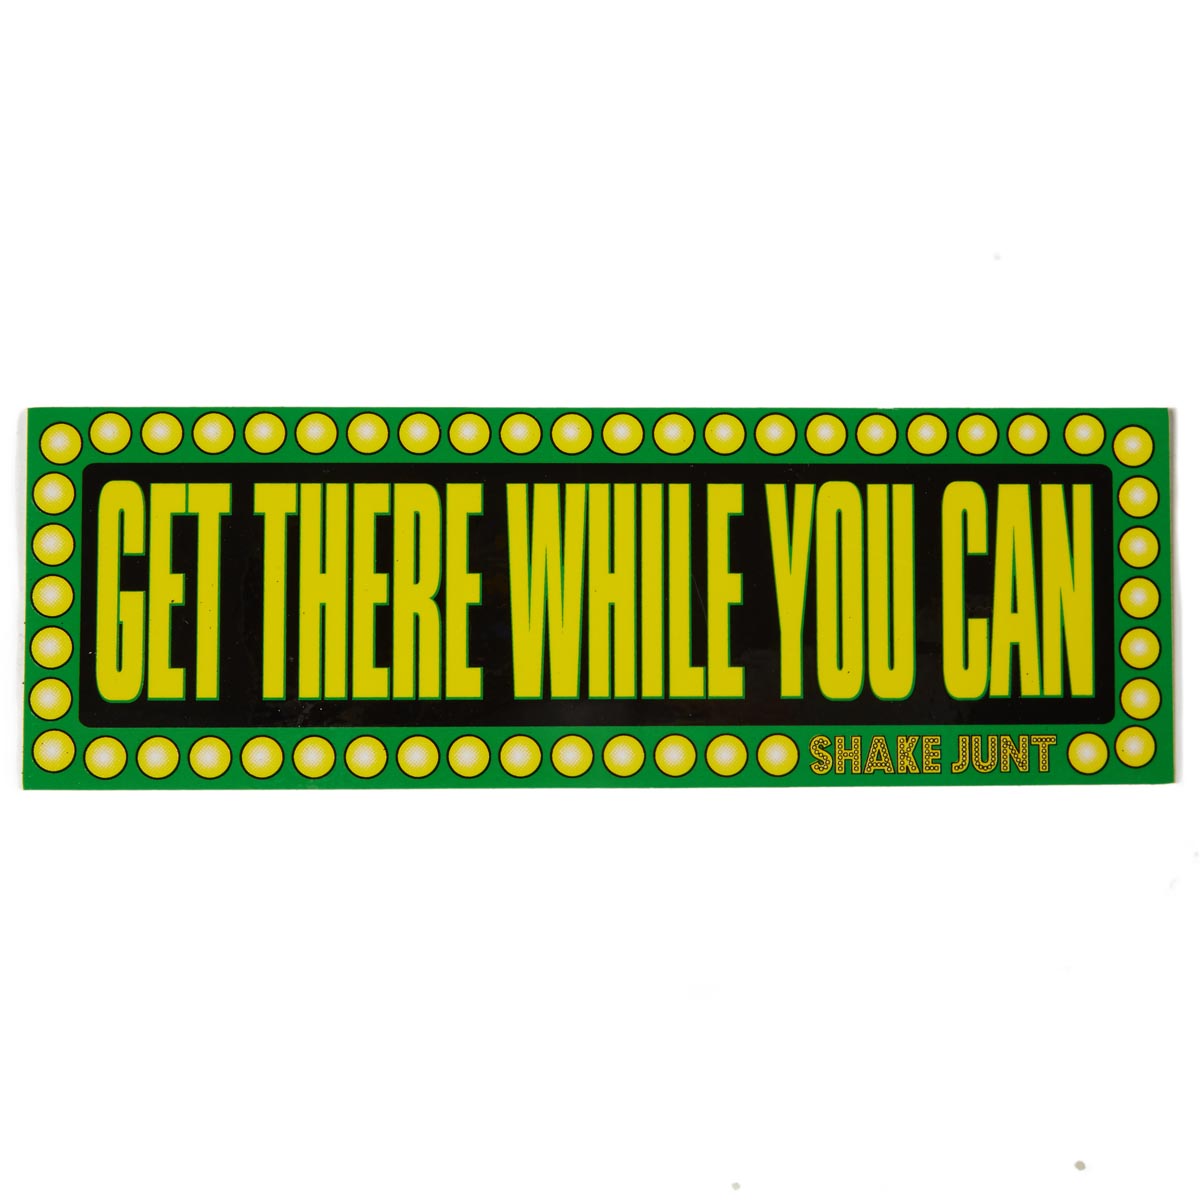 Shake Junt Bumper Sticker - Get There While You Can image 1